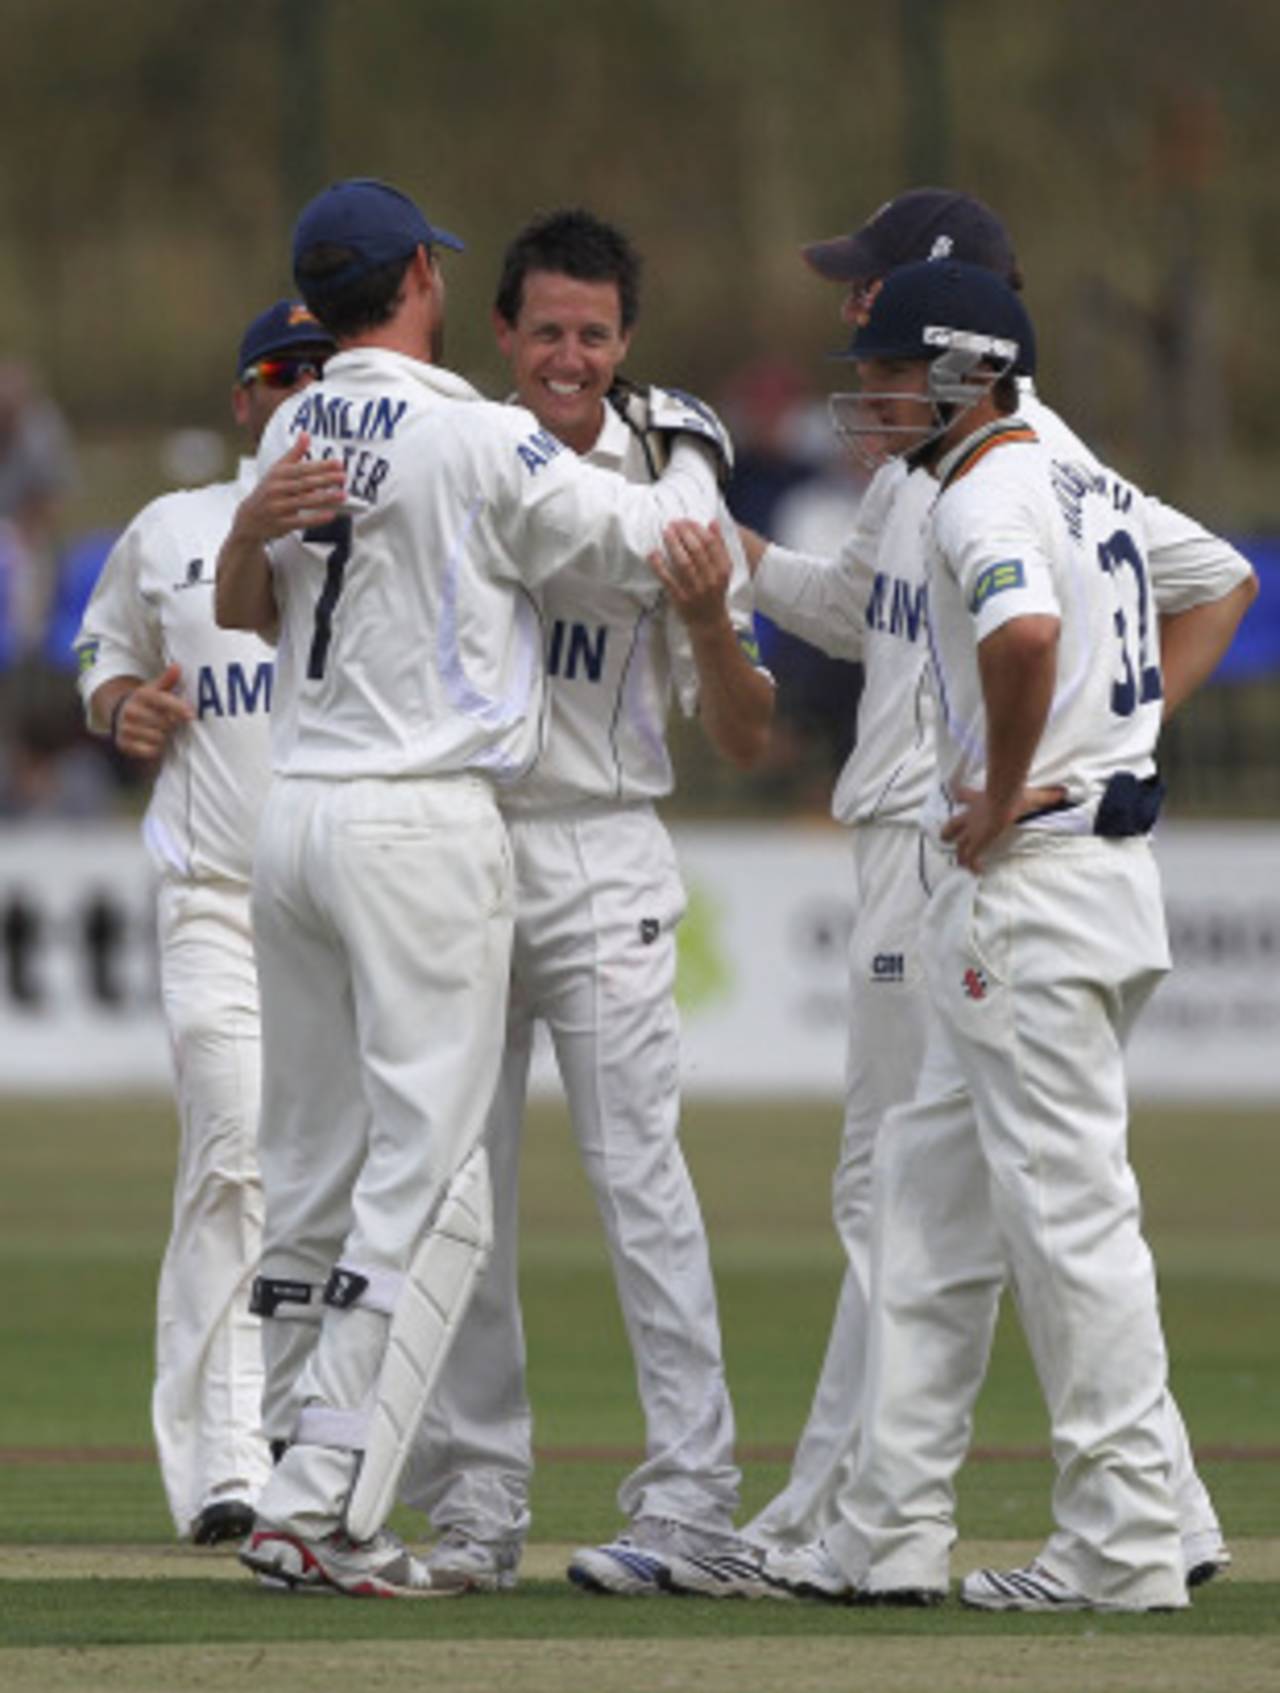 Bryce McGain is congratulated by his Essex team-mates after collecting four wickets, Essex v Warwickshire, County Championship Division One, Southend-on-Sea, August 5 2010 